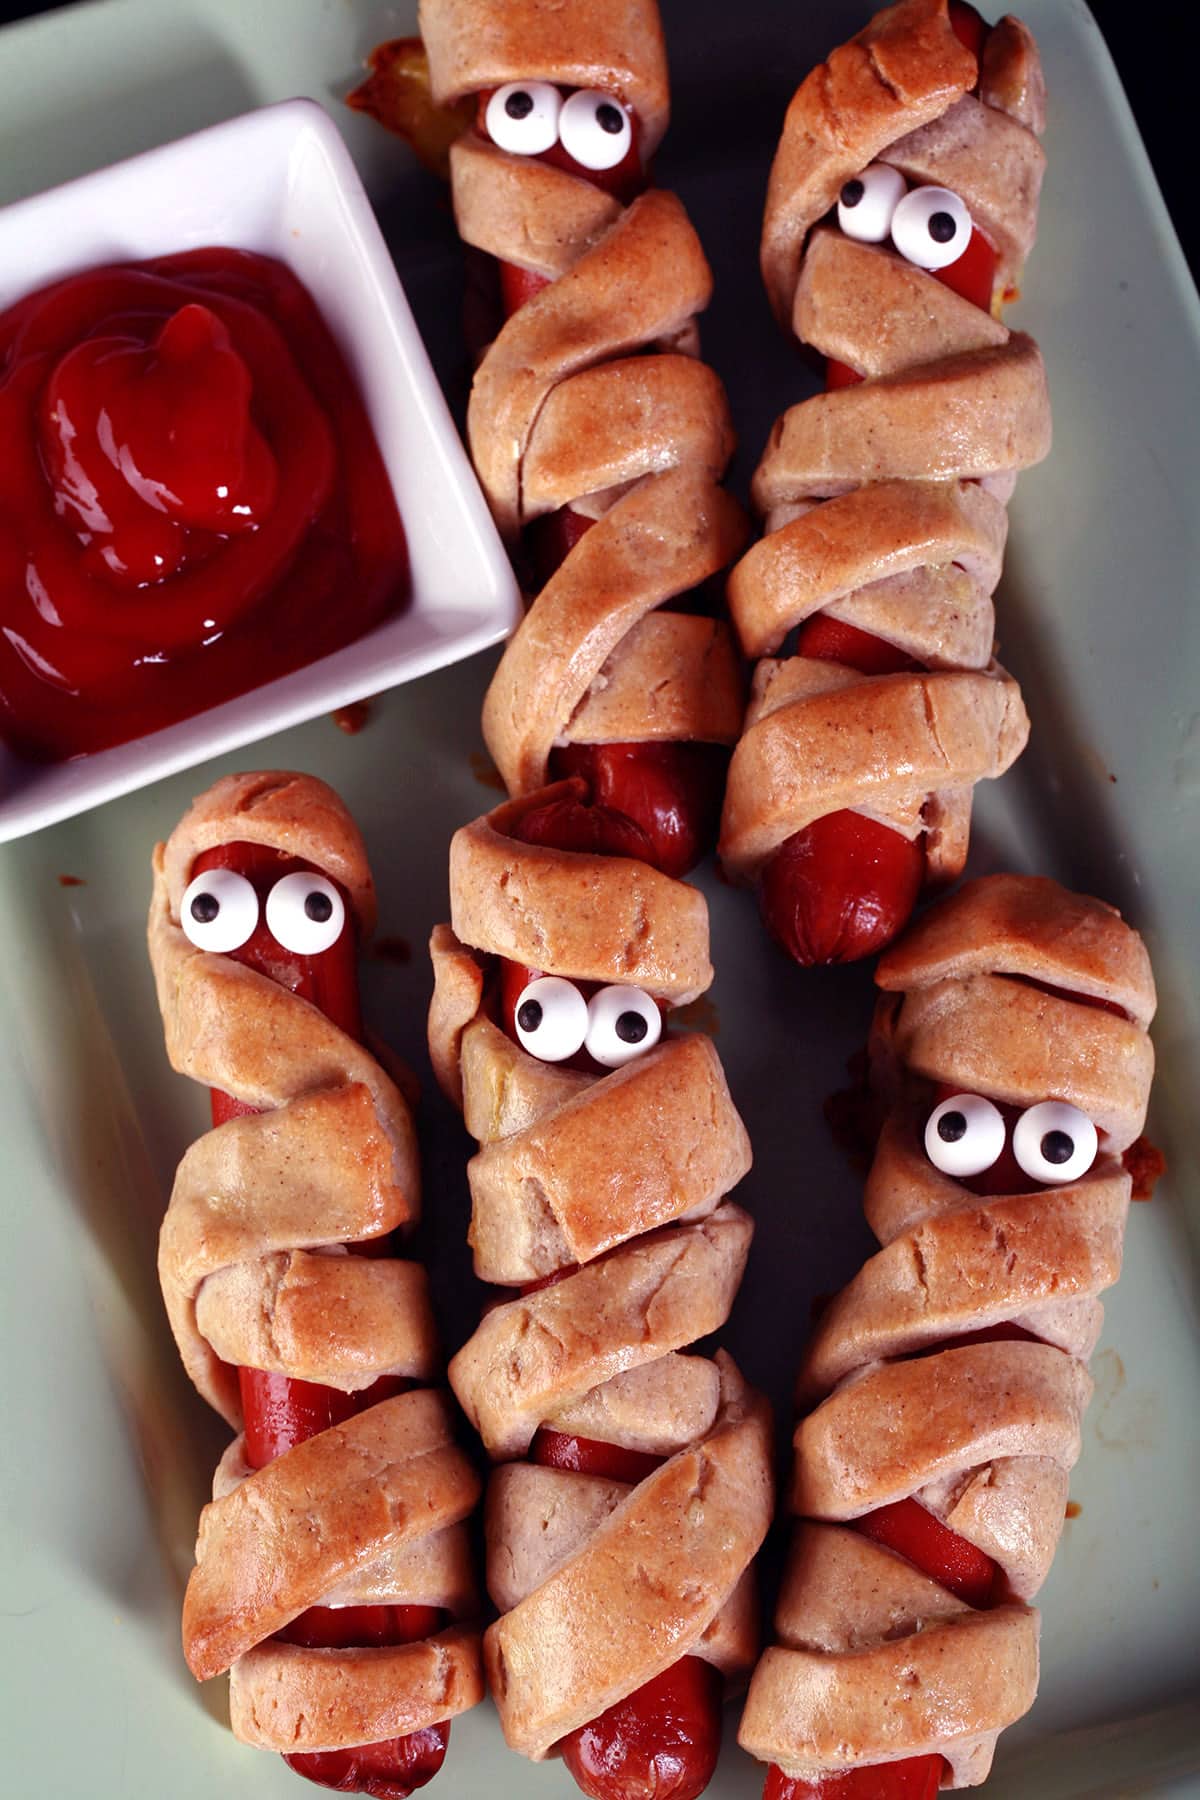 Several gluten-free mummy dogs on a plate. Each have 2 candy eyes.